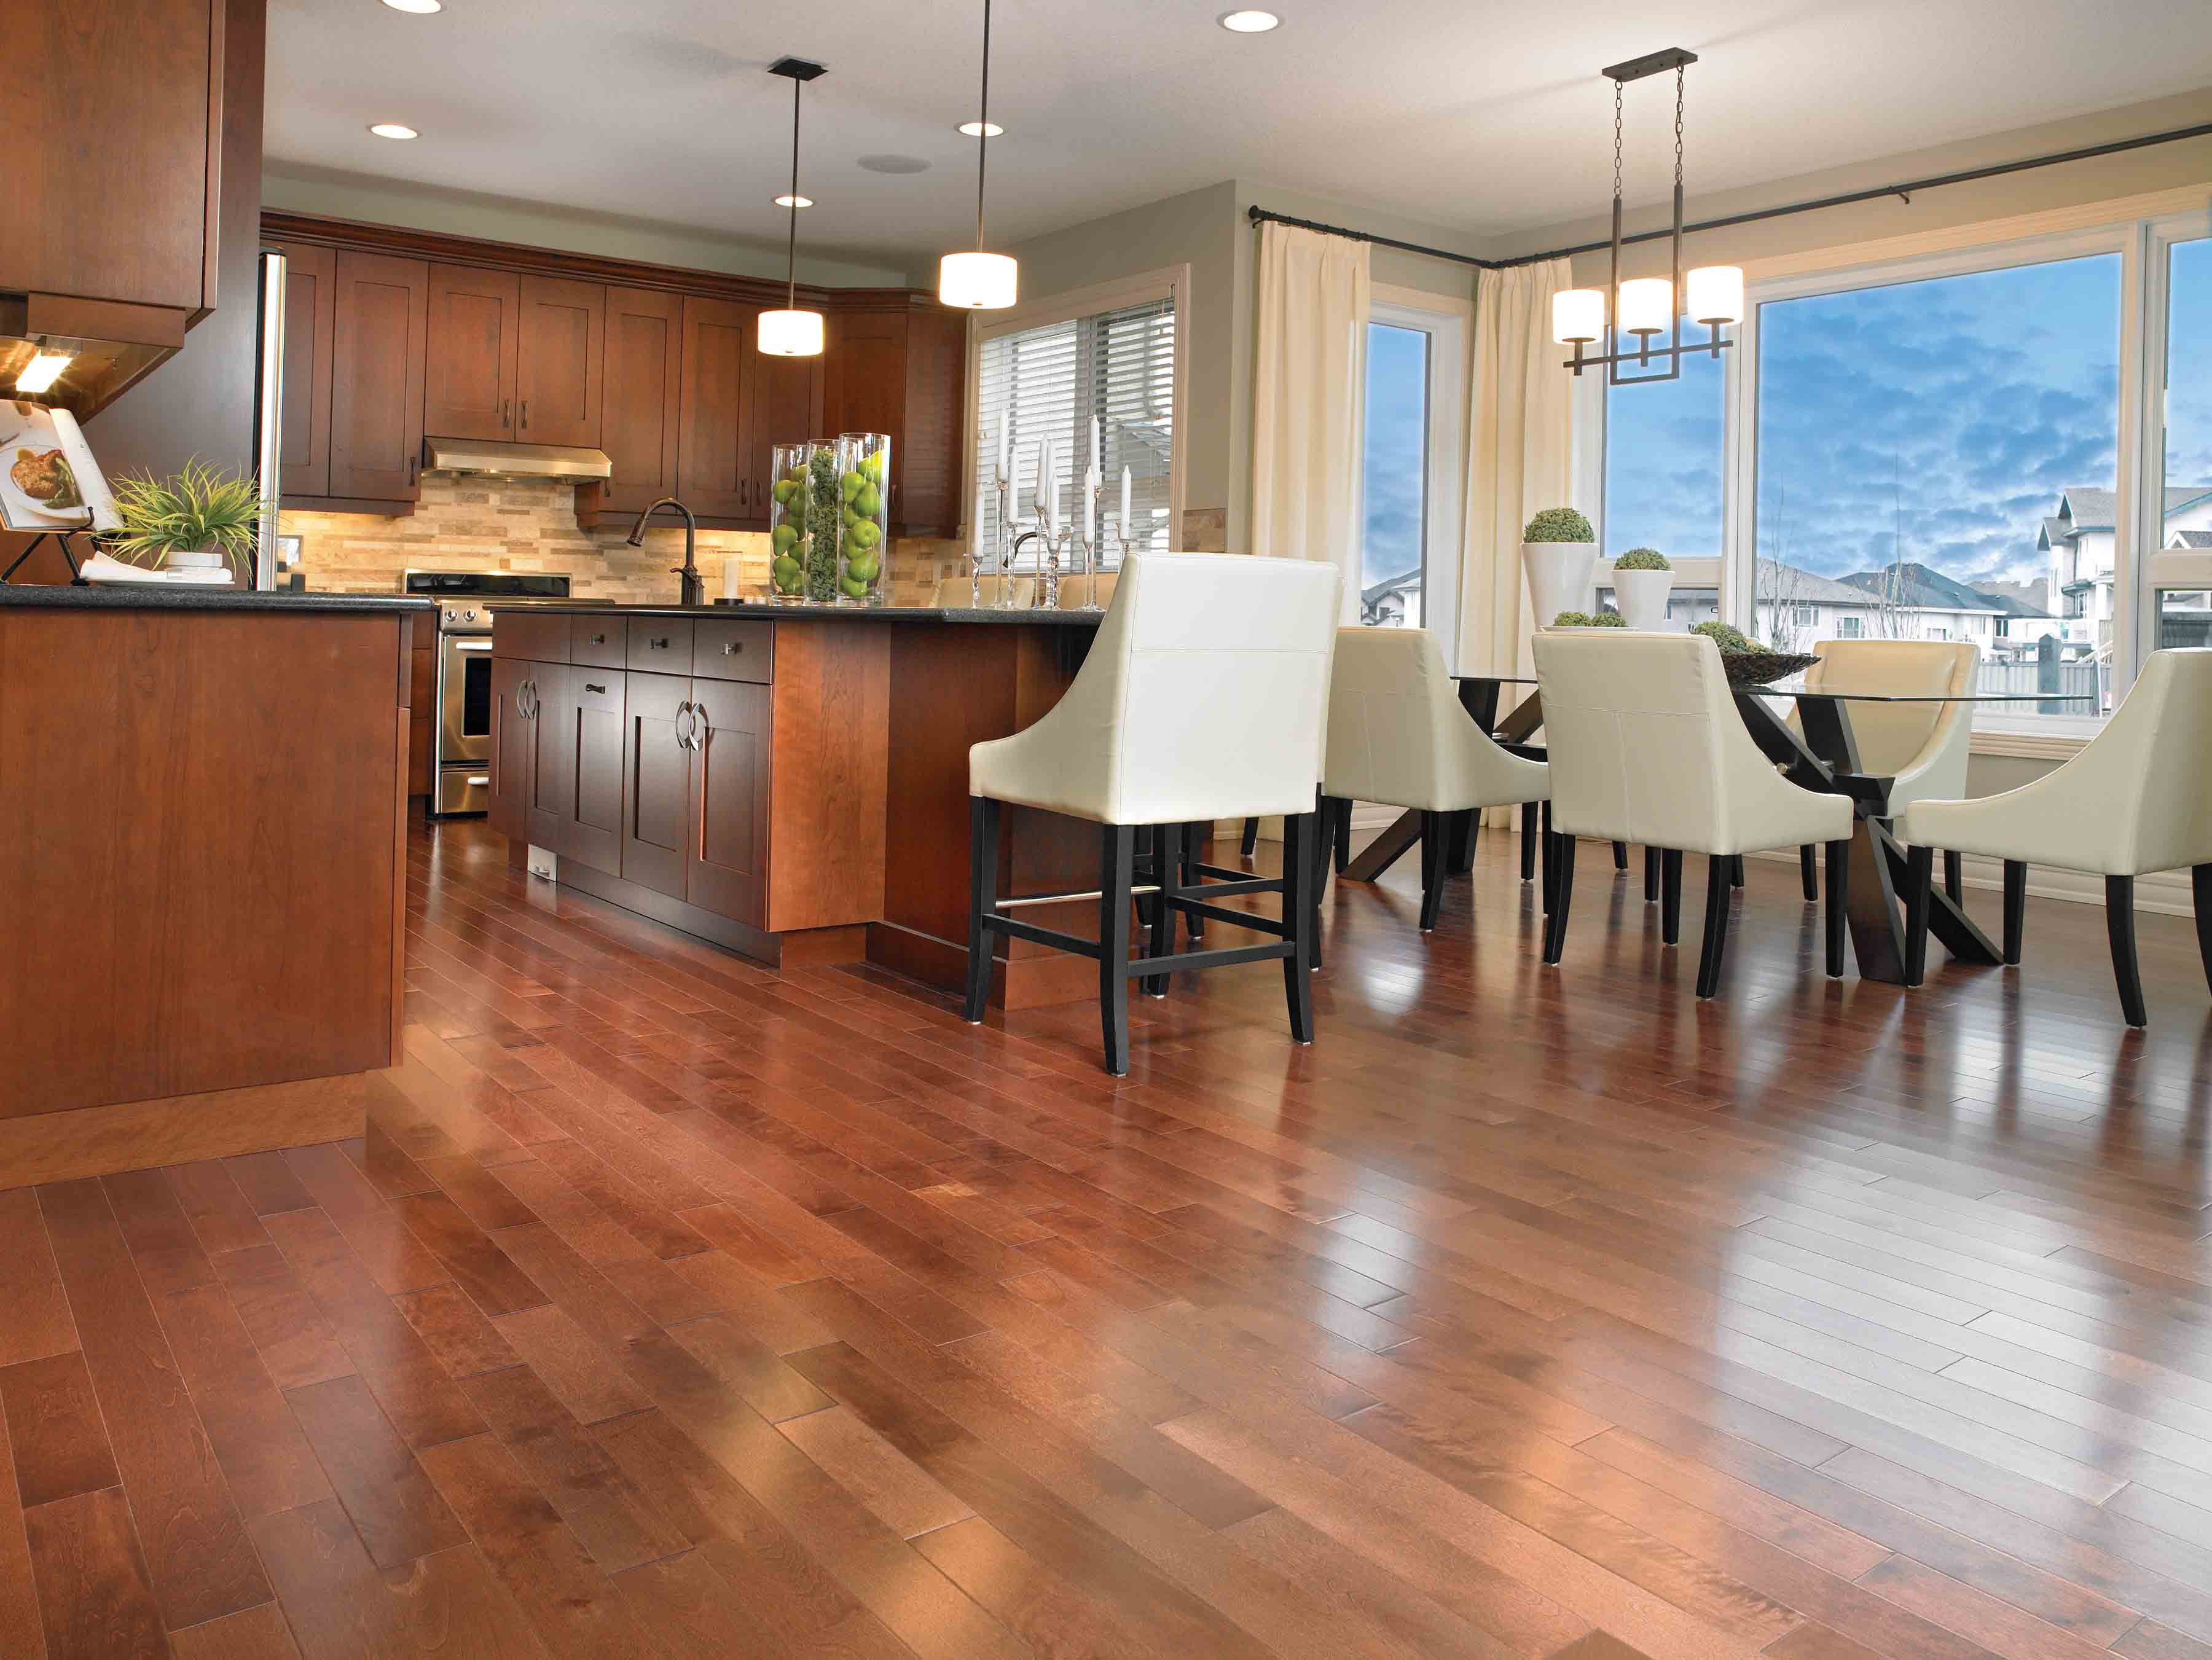 20 Great B and Q Hardwood Flooring 2024 free download b and q hardwood flooring of breathtaking wood flooring pictures beautiful floors are here only in breathtaking wood flooring picture hardwood in kitchen pro and con express mirage yellow bi